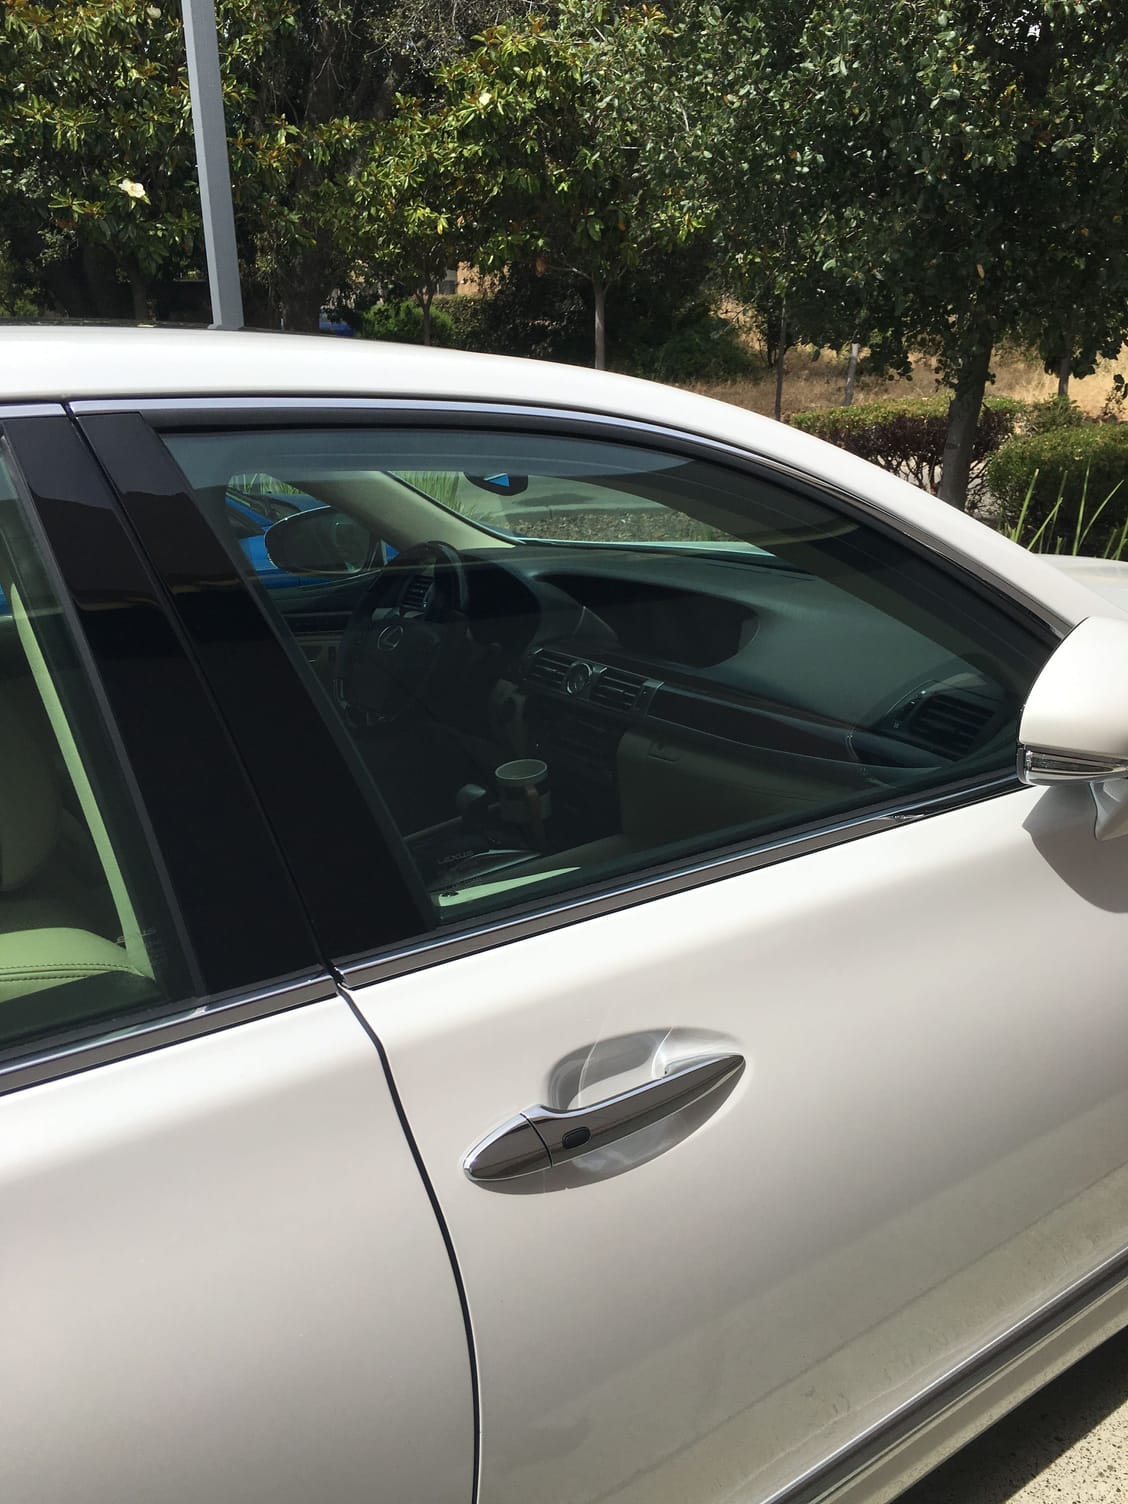 tint levels for car windows